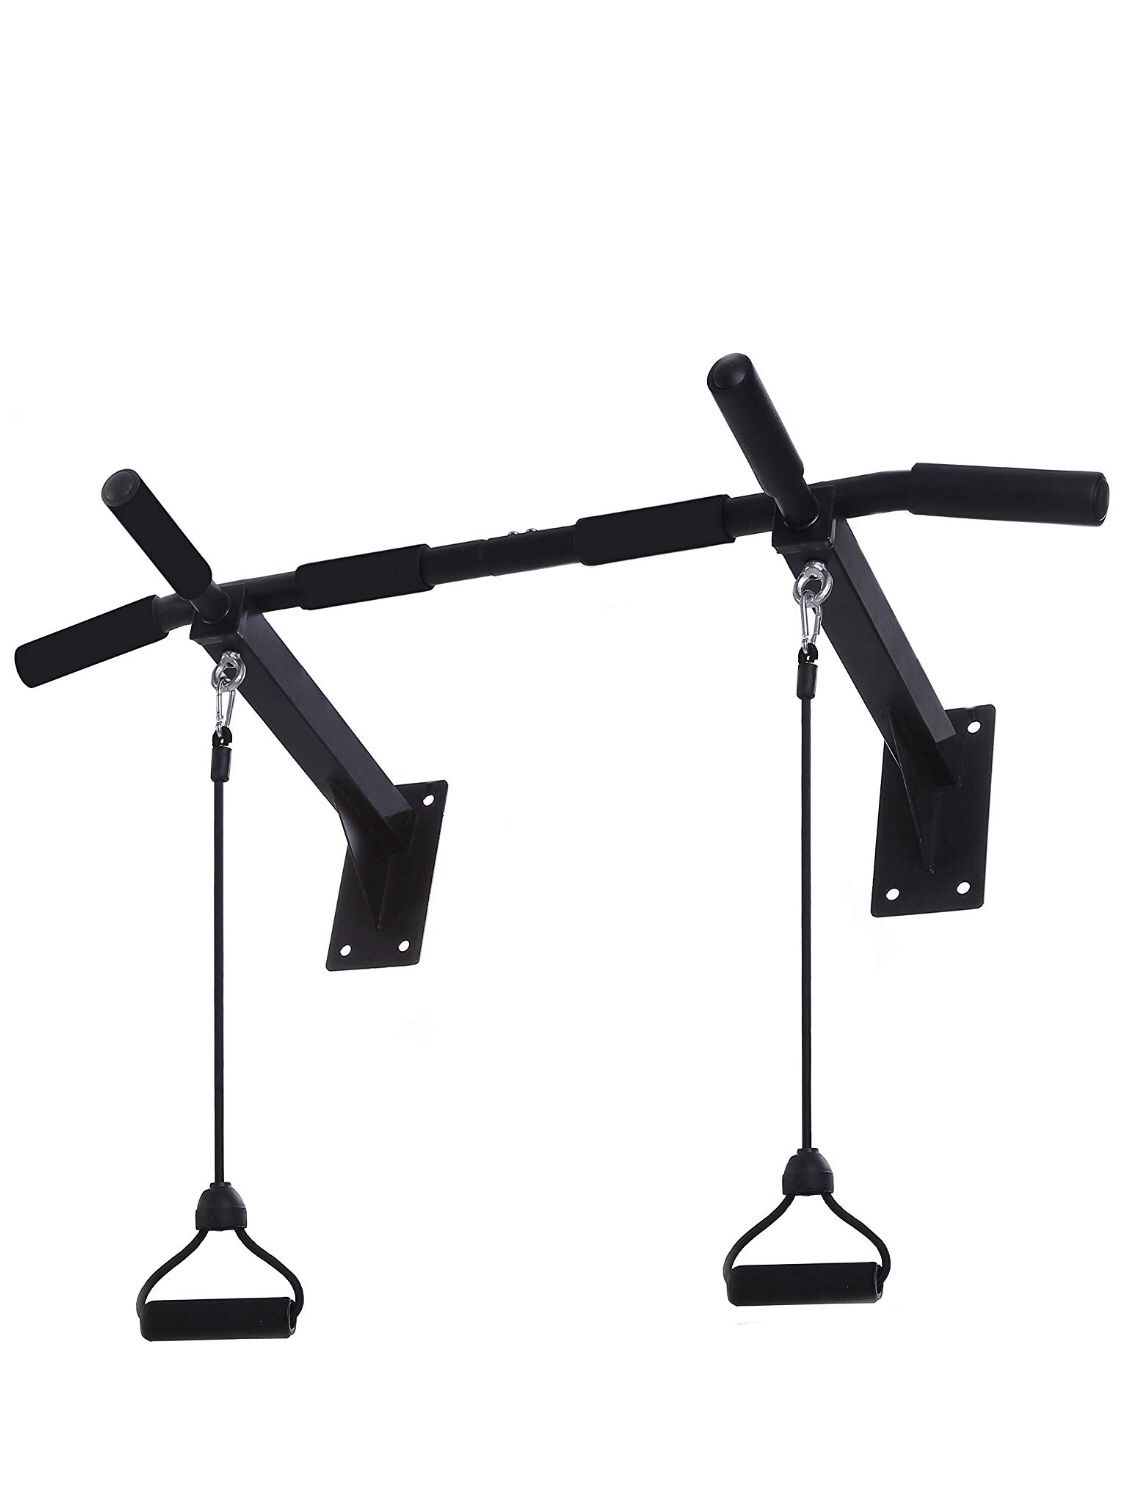 Wall Mounted Pull Up Bar - Upper Body Workout Bar with 4 Grip Positions, Resistance Band Workout Equipment